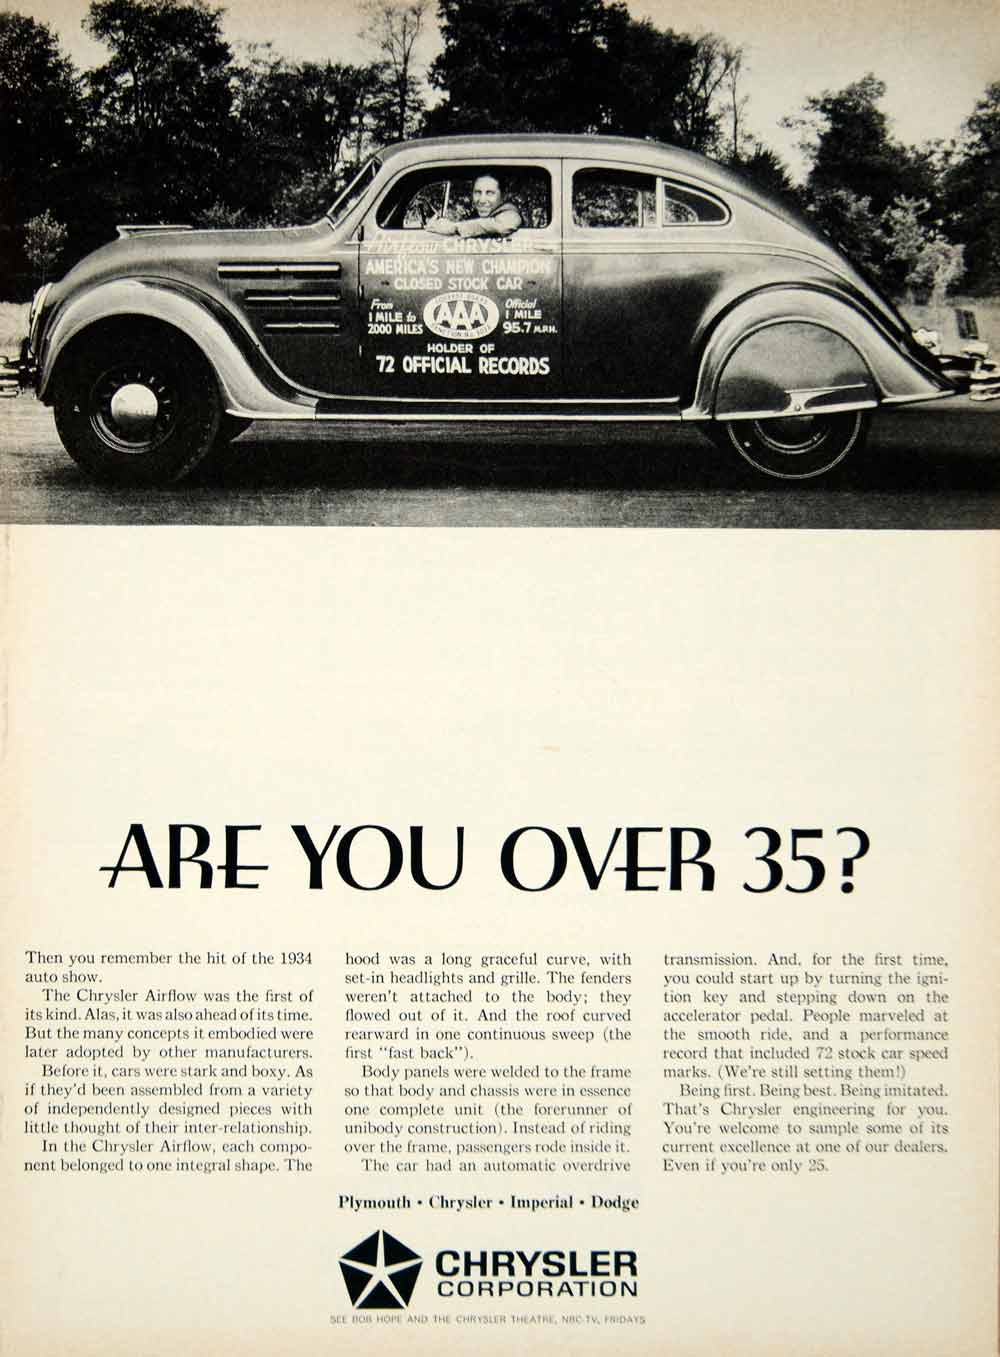 1964 Ad Chrysler Corporation 1934 Airflow Closed Stock Car Champion Race YCD3